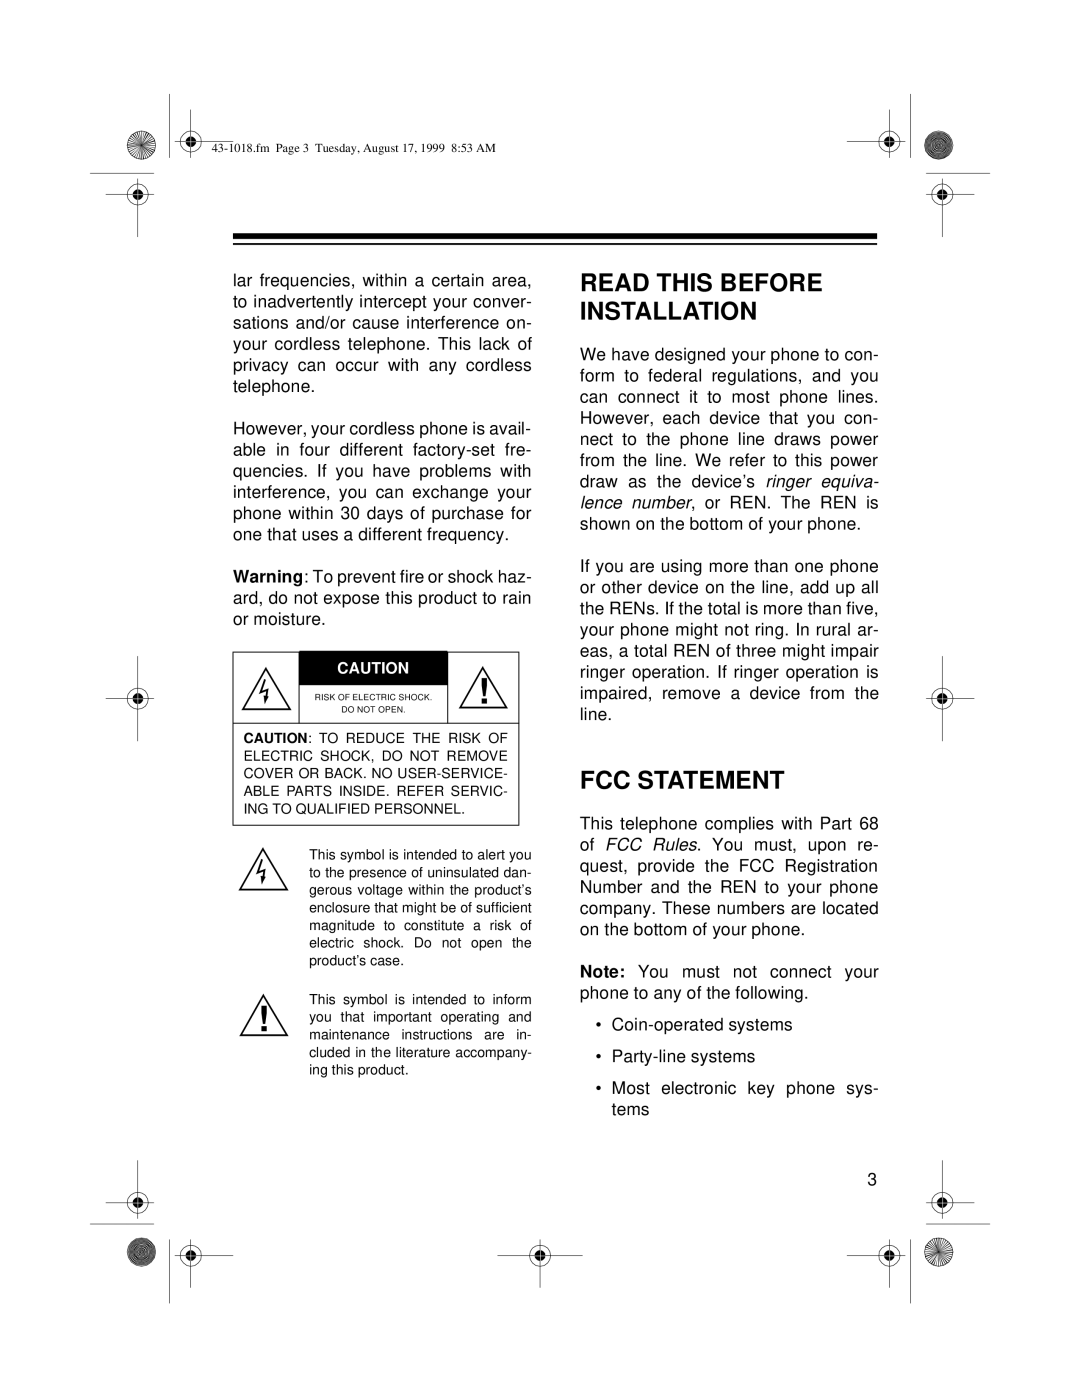 Radio Shack ET-518 owner manual Read This Before Installation, Fcc Statement 